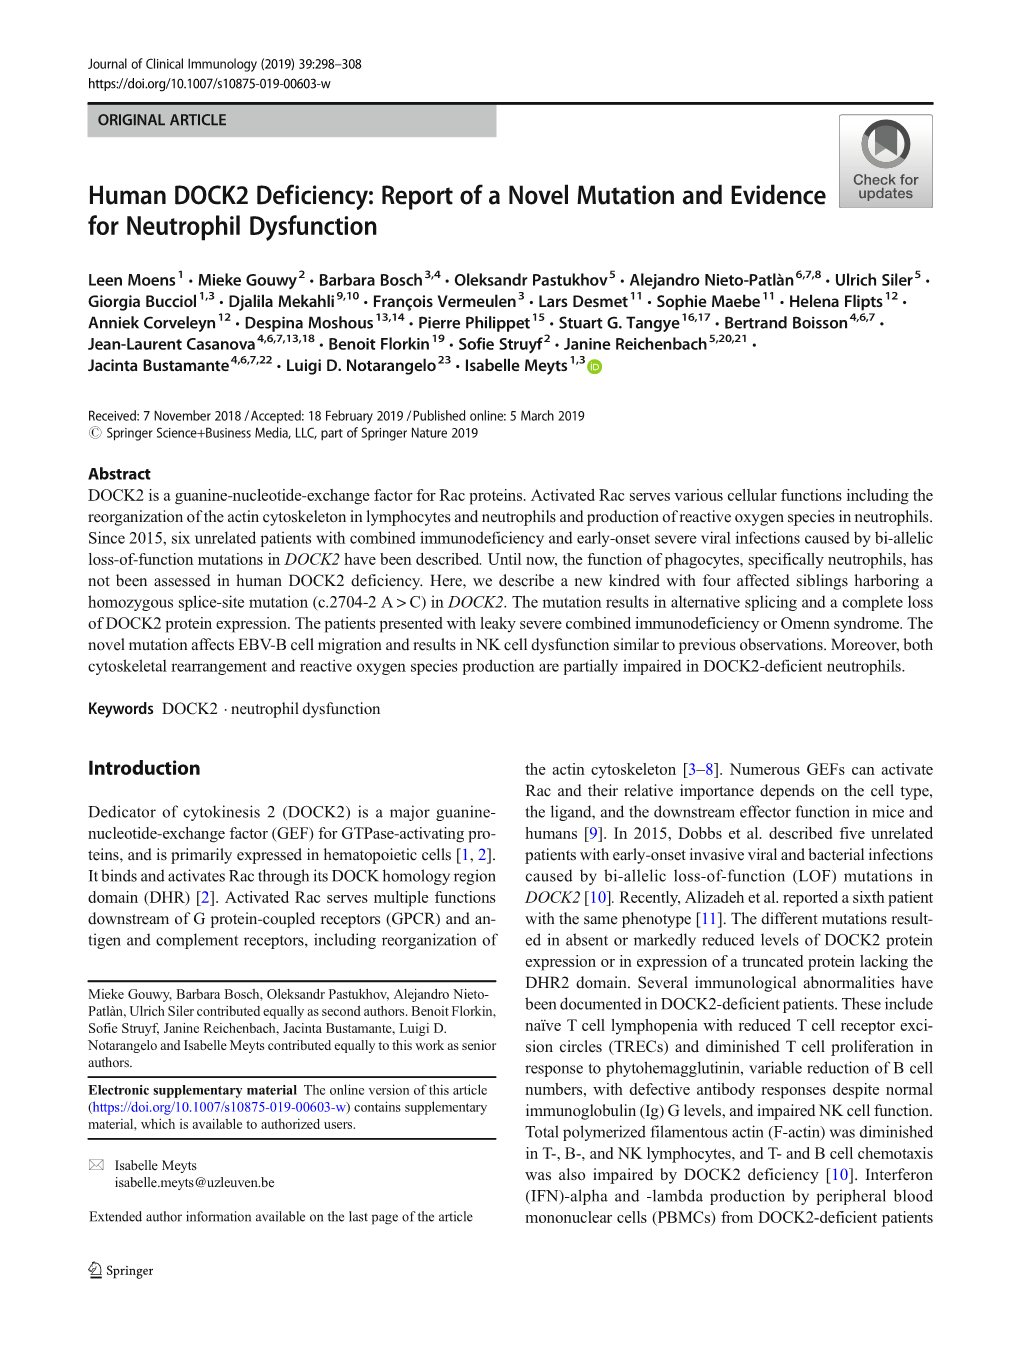 Human DOCK2 Deficiency: Report of a Novel Mutation and Evidence for Neutrophil Dysfunction